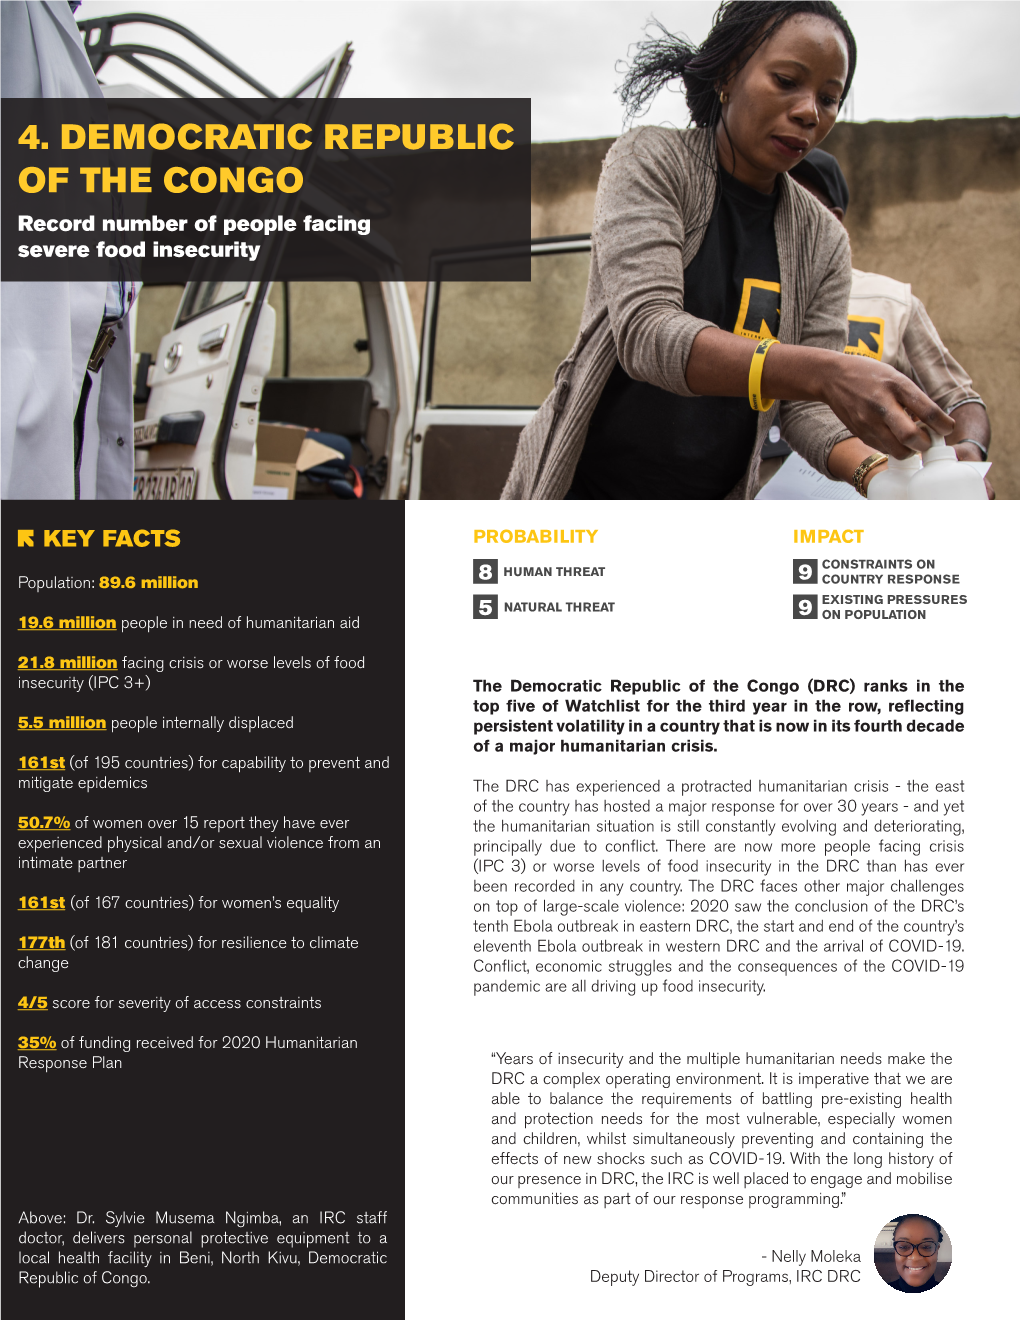 4. DEMOCRATIC REPUBLIC of the CONGO Record Number of People Facing Severe Food Insecurity